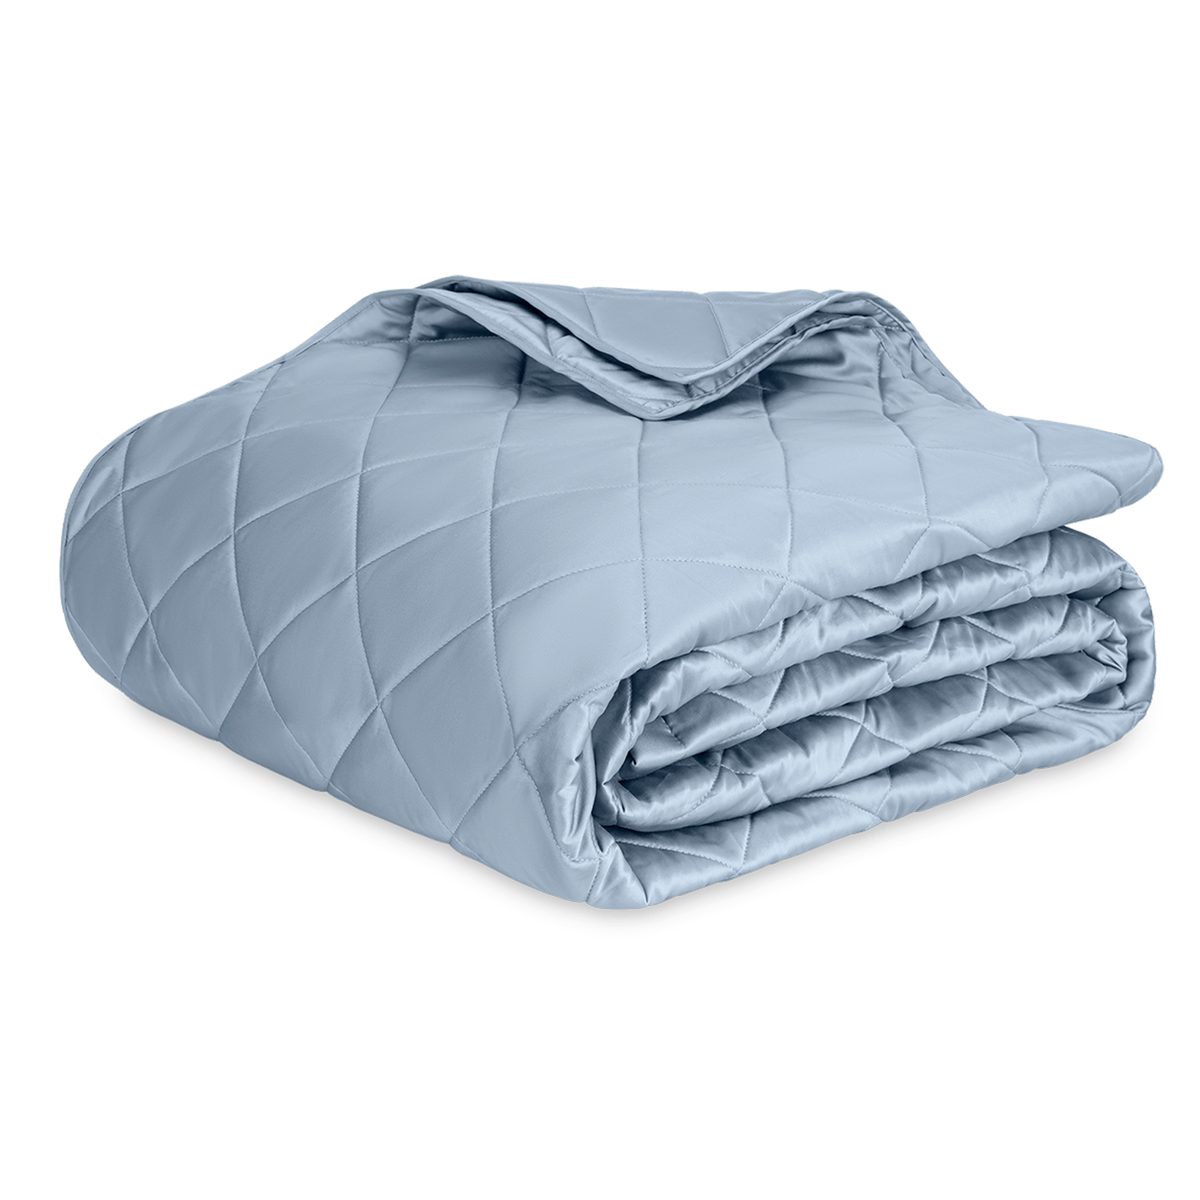 Silo Image of Matouk Nocturne Quilted Bedding Quilt in Hazy Blue Color